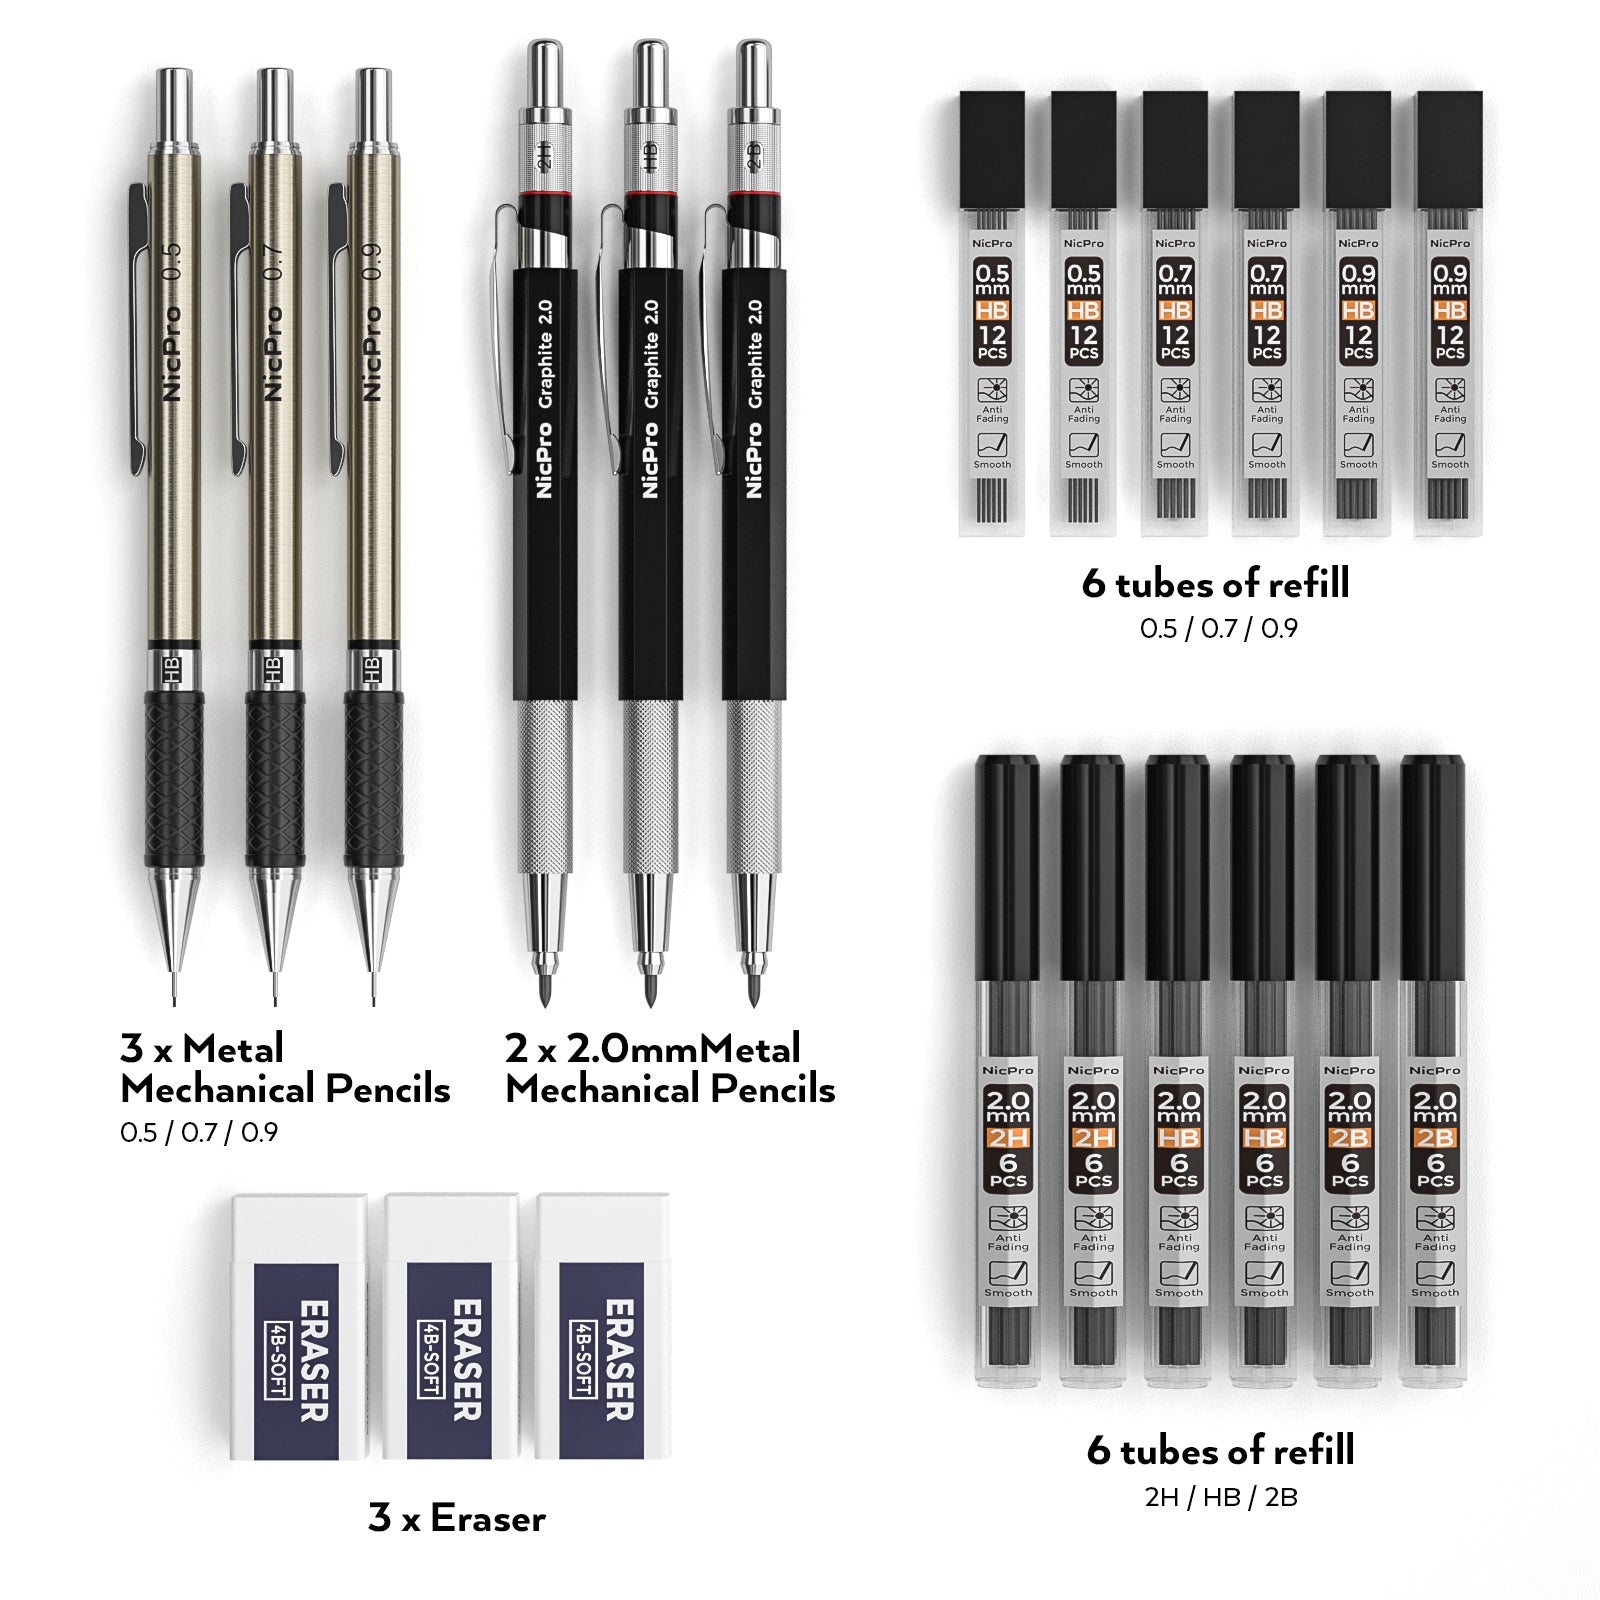  Nicpro 35PCS Metal Mechanical Pencils Set in Case, Art  Drafting Pencil 0.5, 0.7, 0.9 mm & 3PCS 2mm Graphite Lead Holder(HB 2H 2B  4H 4B 6B Colors) for Drawing Sketching